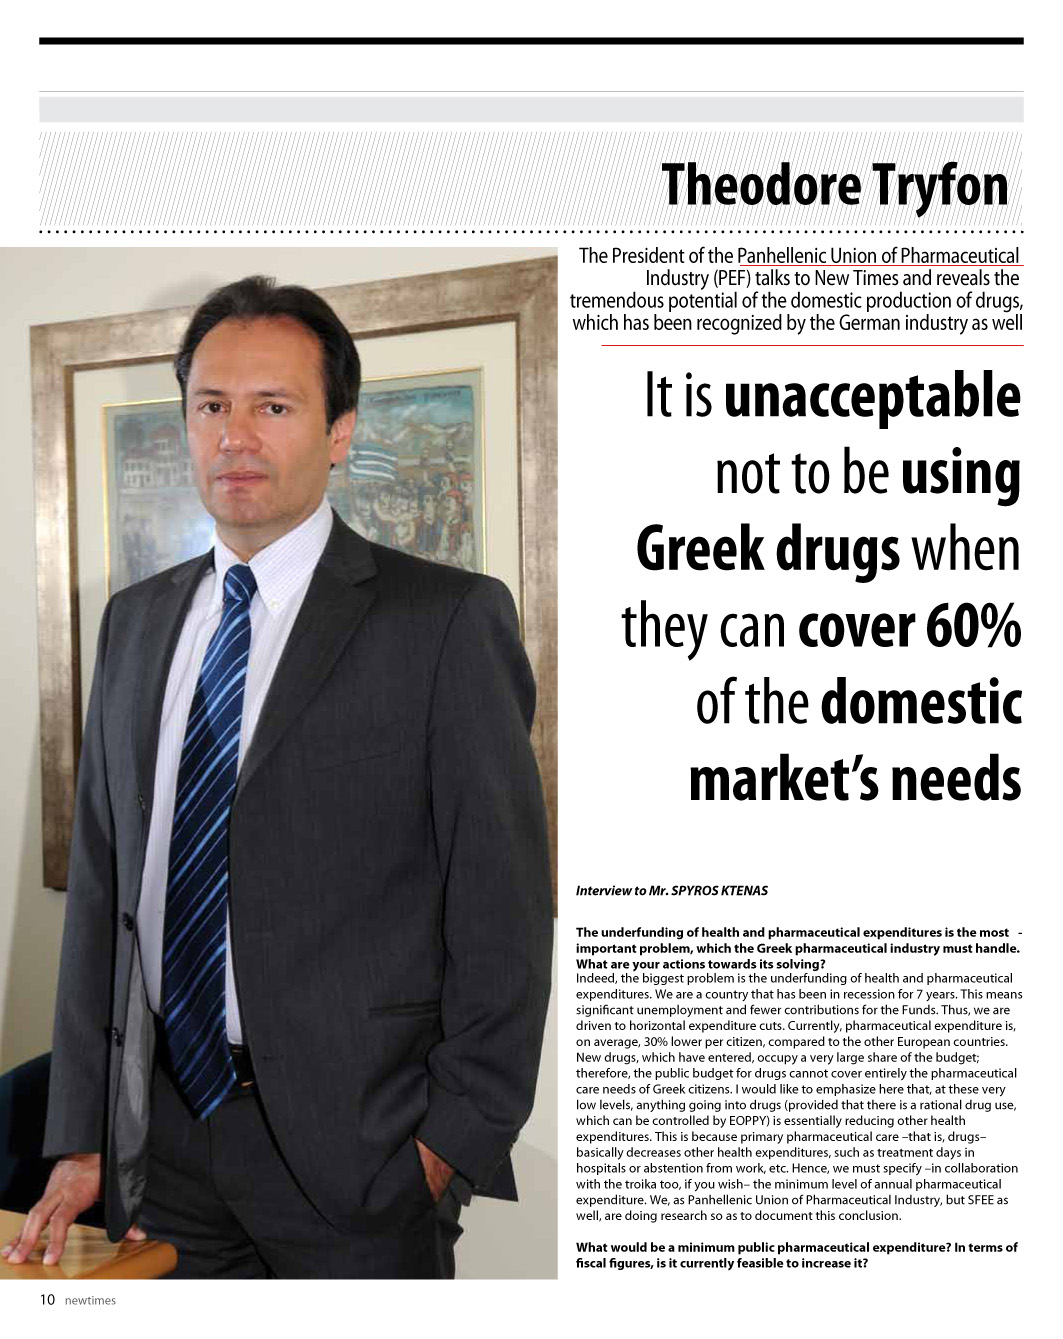 Theodore TryfonThe President of the Panhellenic Union of Pharmaceutical Industry (PEF) talks to New Times and reveals the tremendous potential of the domestic production of drugs, which has been recognized by the German industry as well